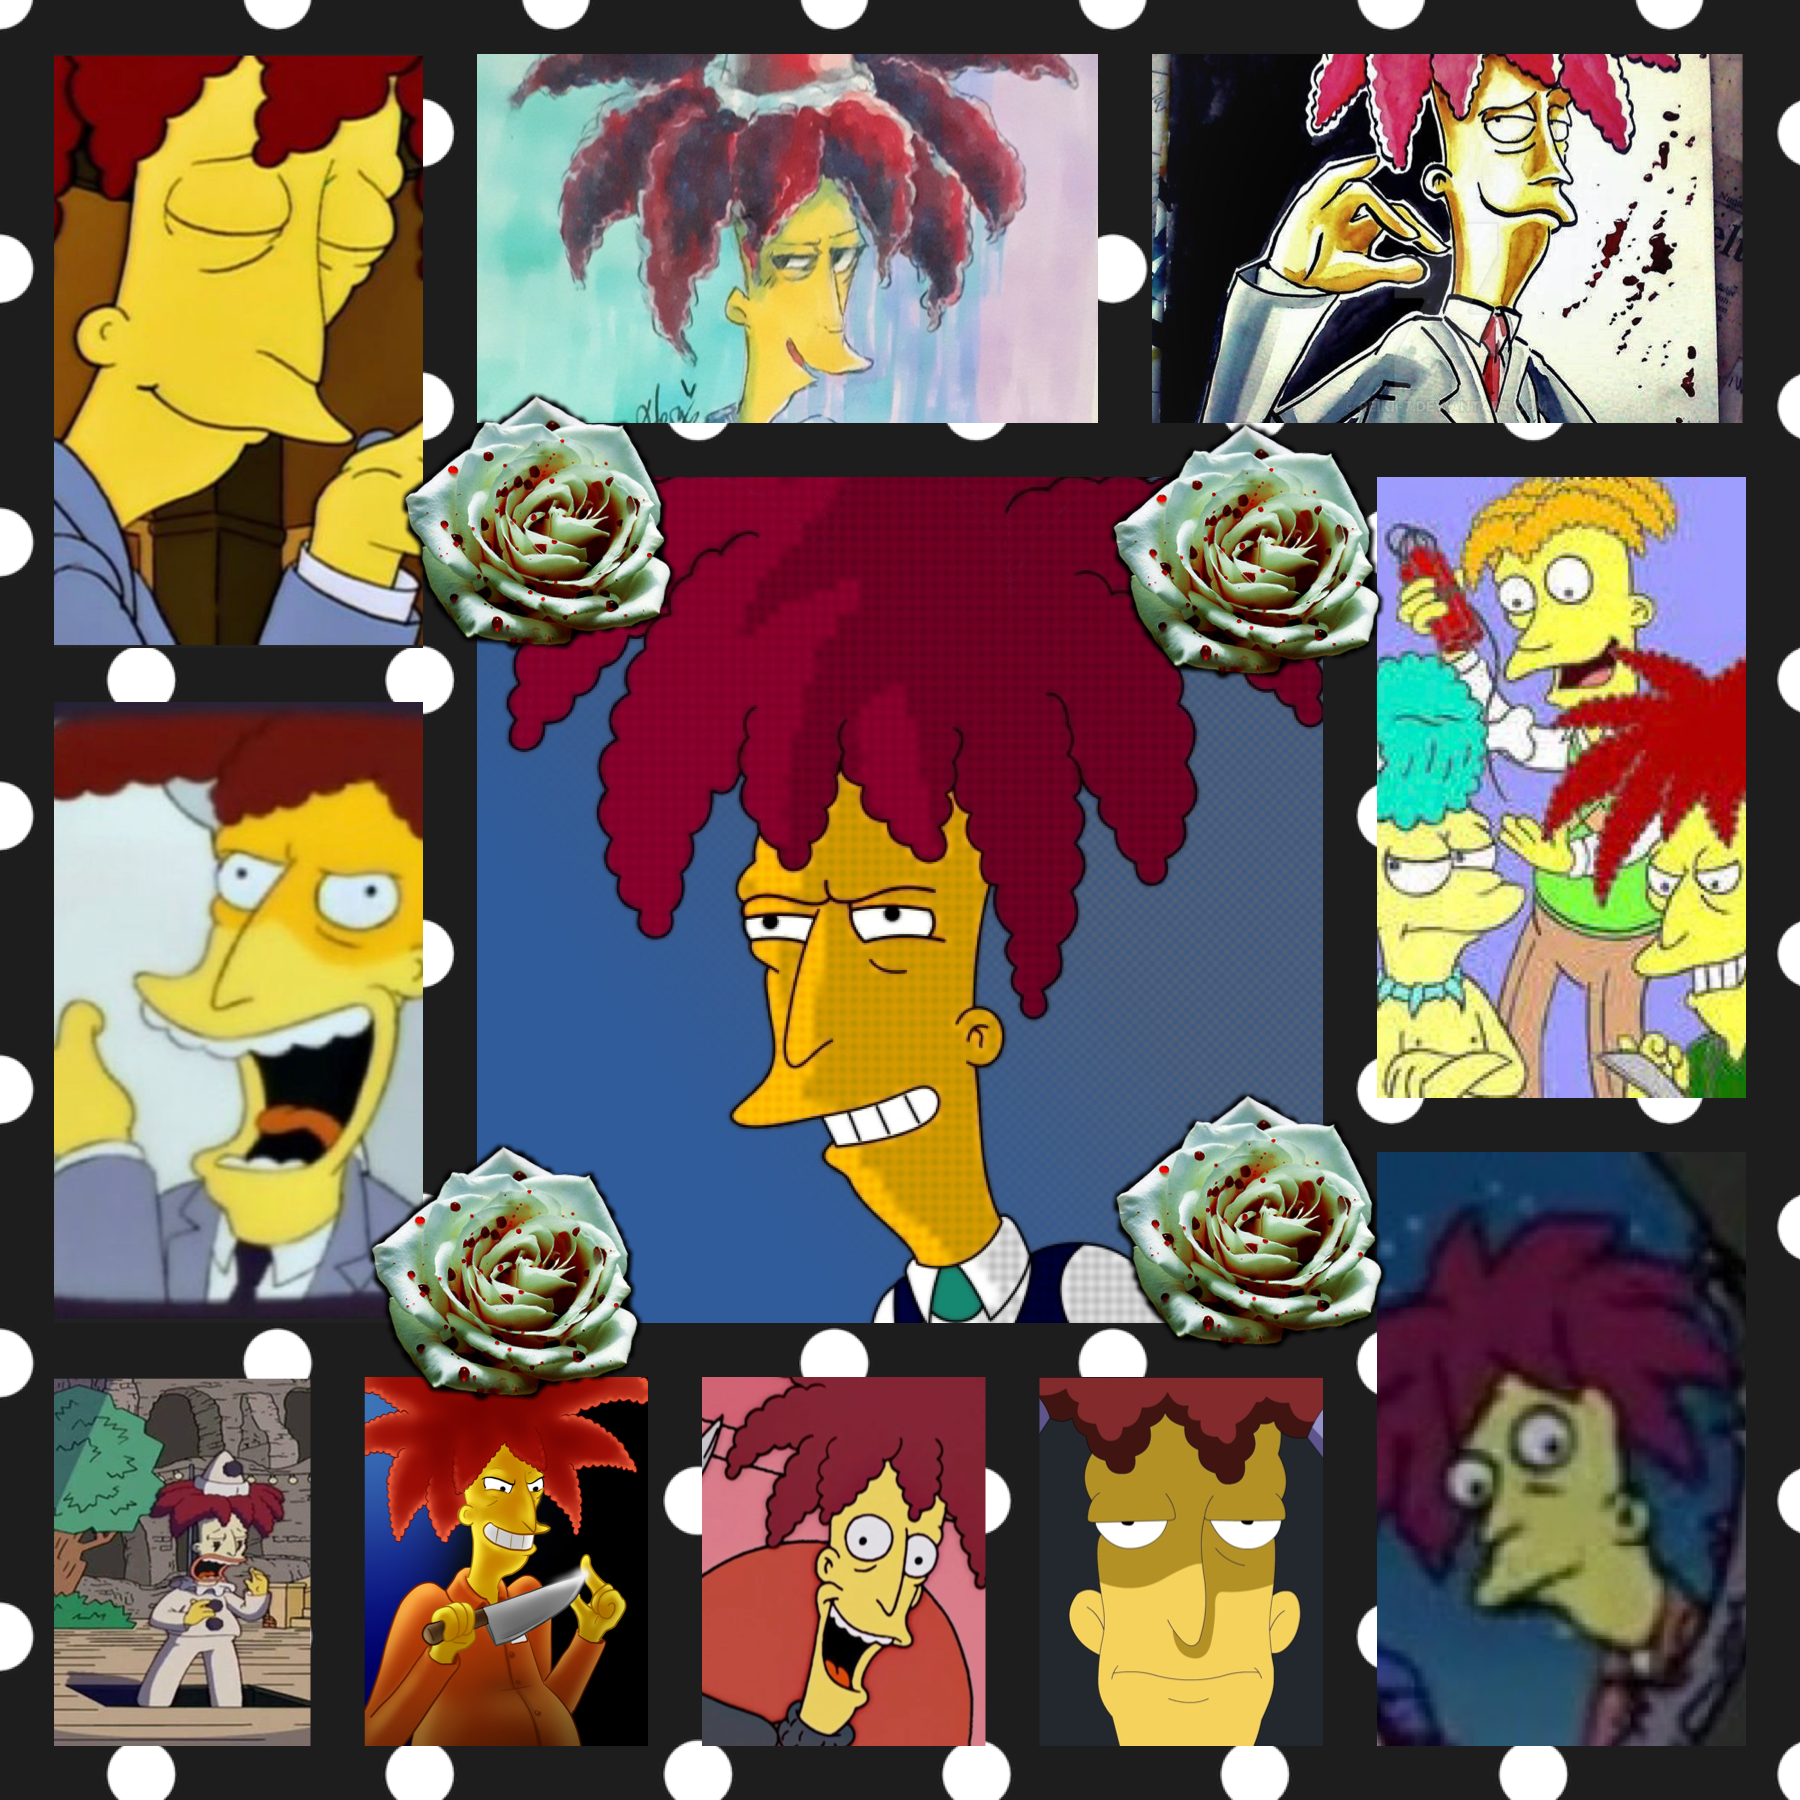 🔪tap here🔪
Sideshow bob!! Yes he is a true legend!!! I’ll give you a Bart pinboard next me thinks